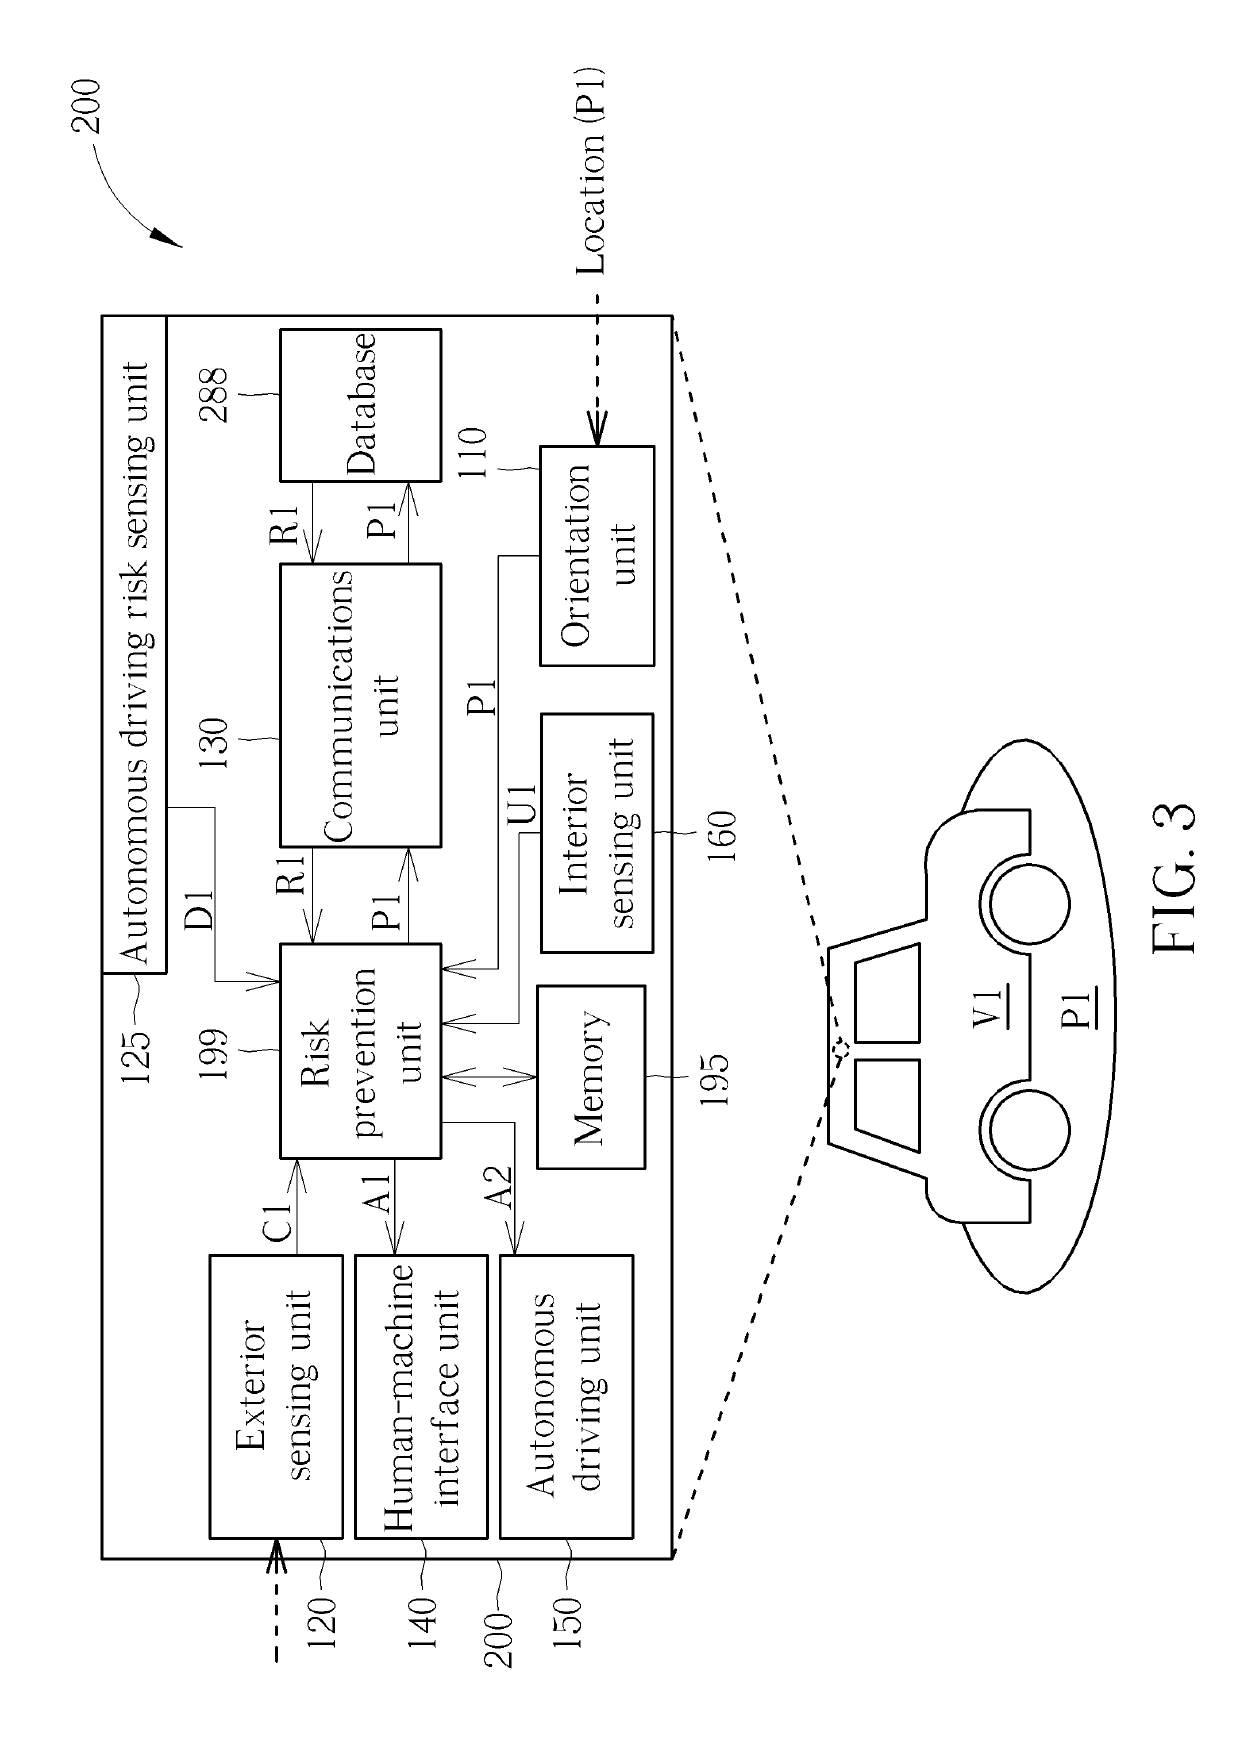 Vehicle driving risk classification and prevention system and method